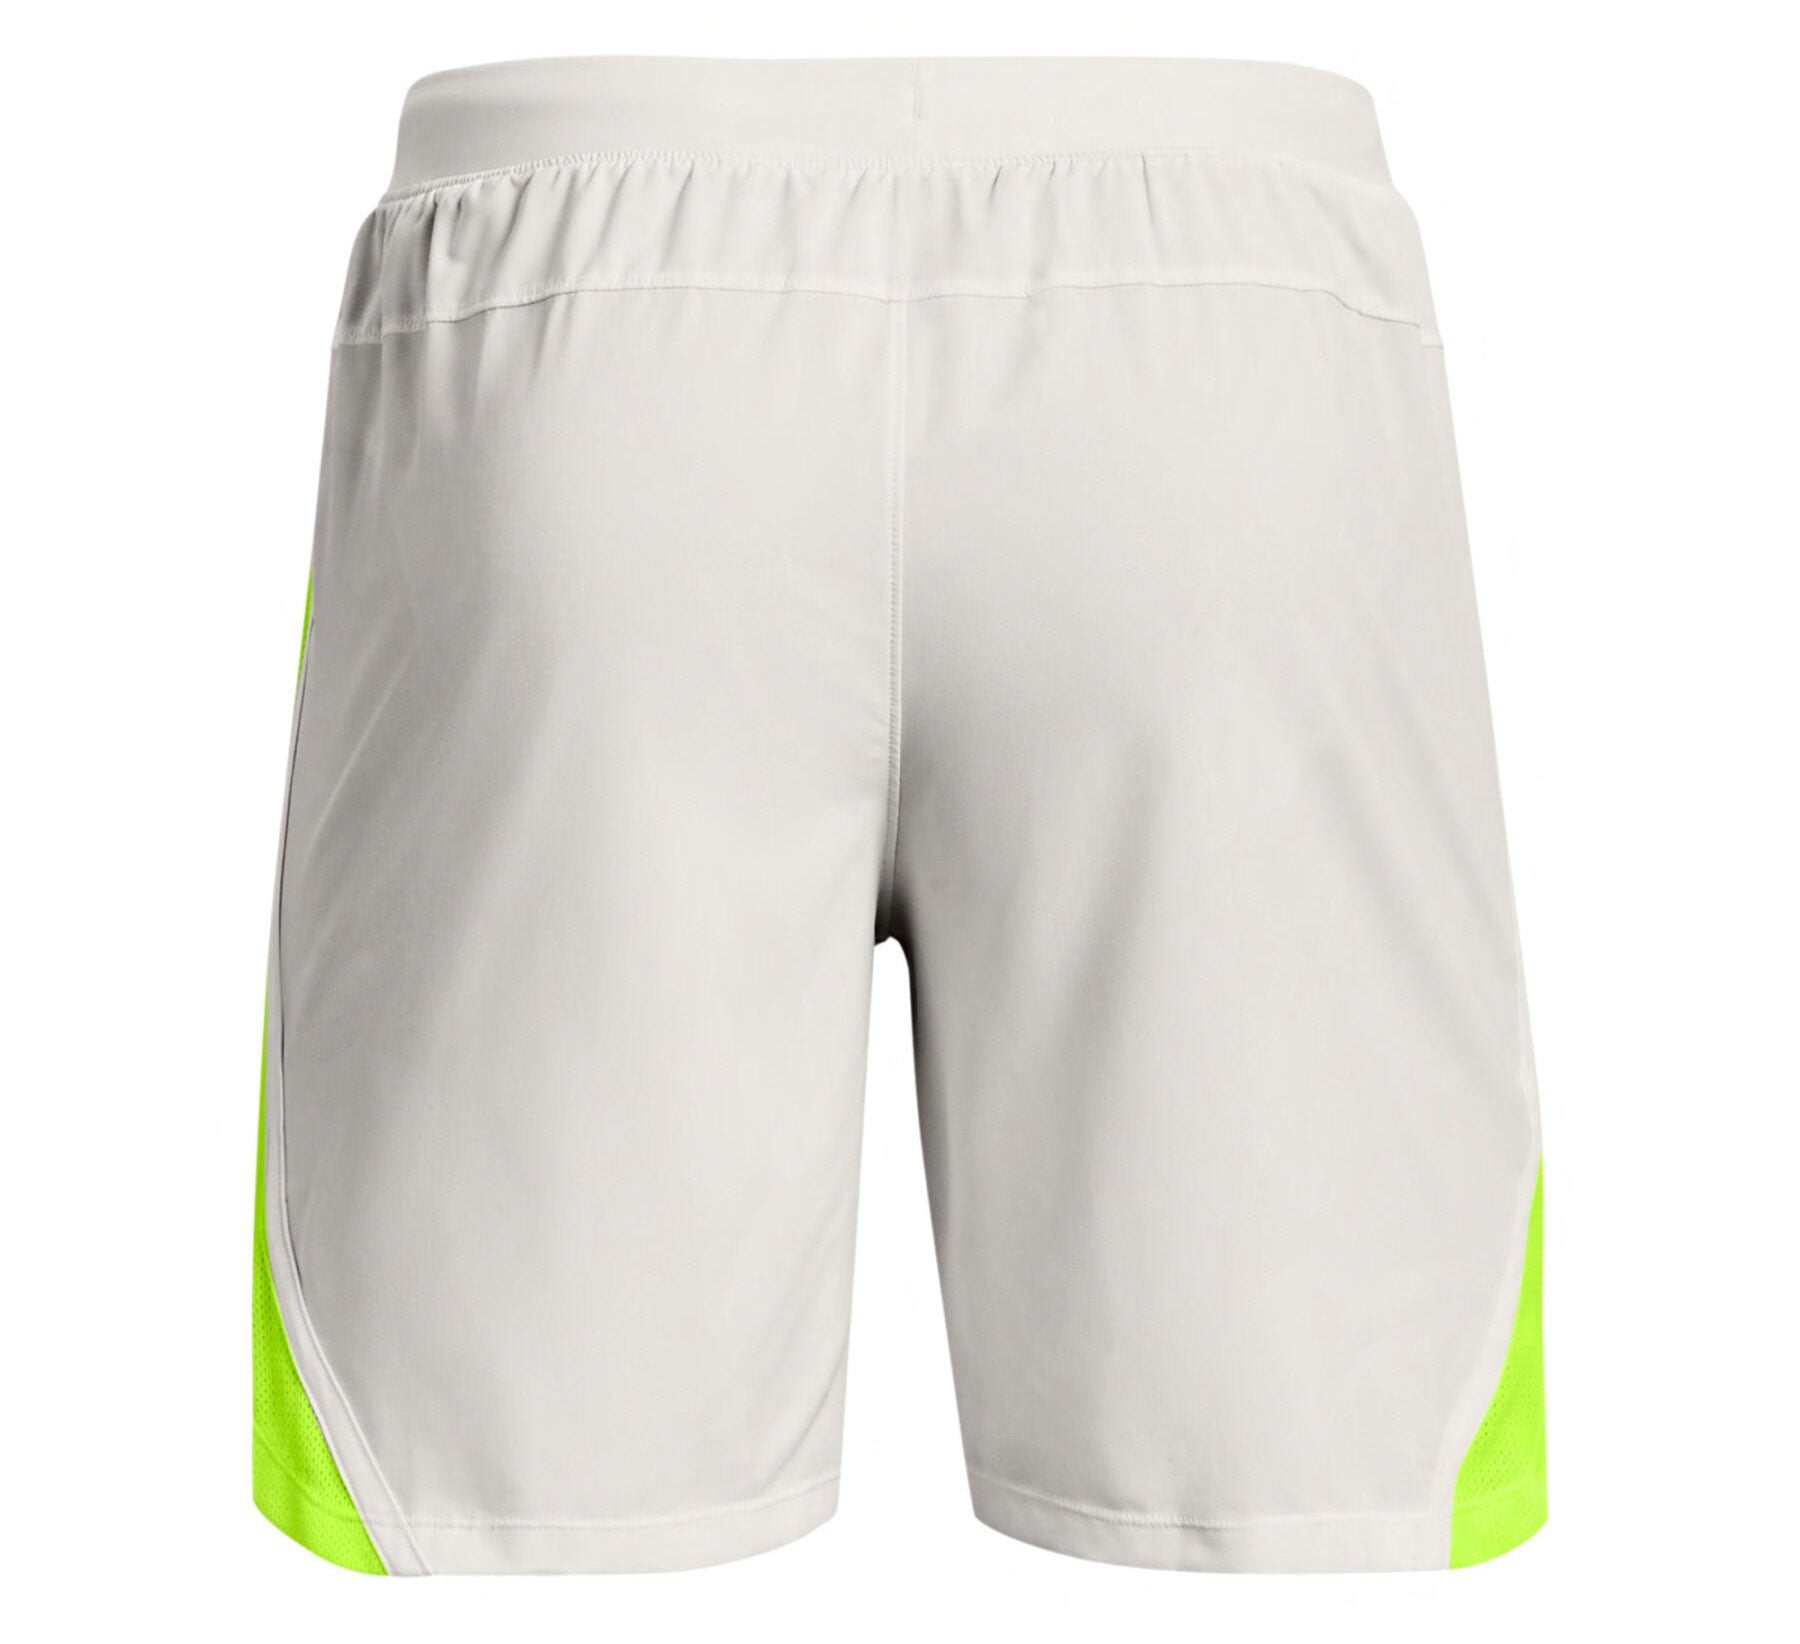 Under Armour Launch Run 7 inch Shorts - Mens - Grey Mist/Lime Surge